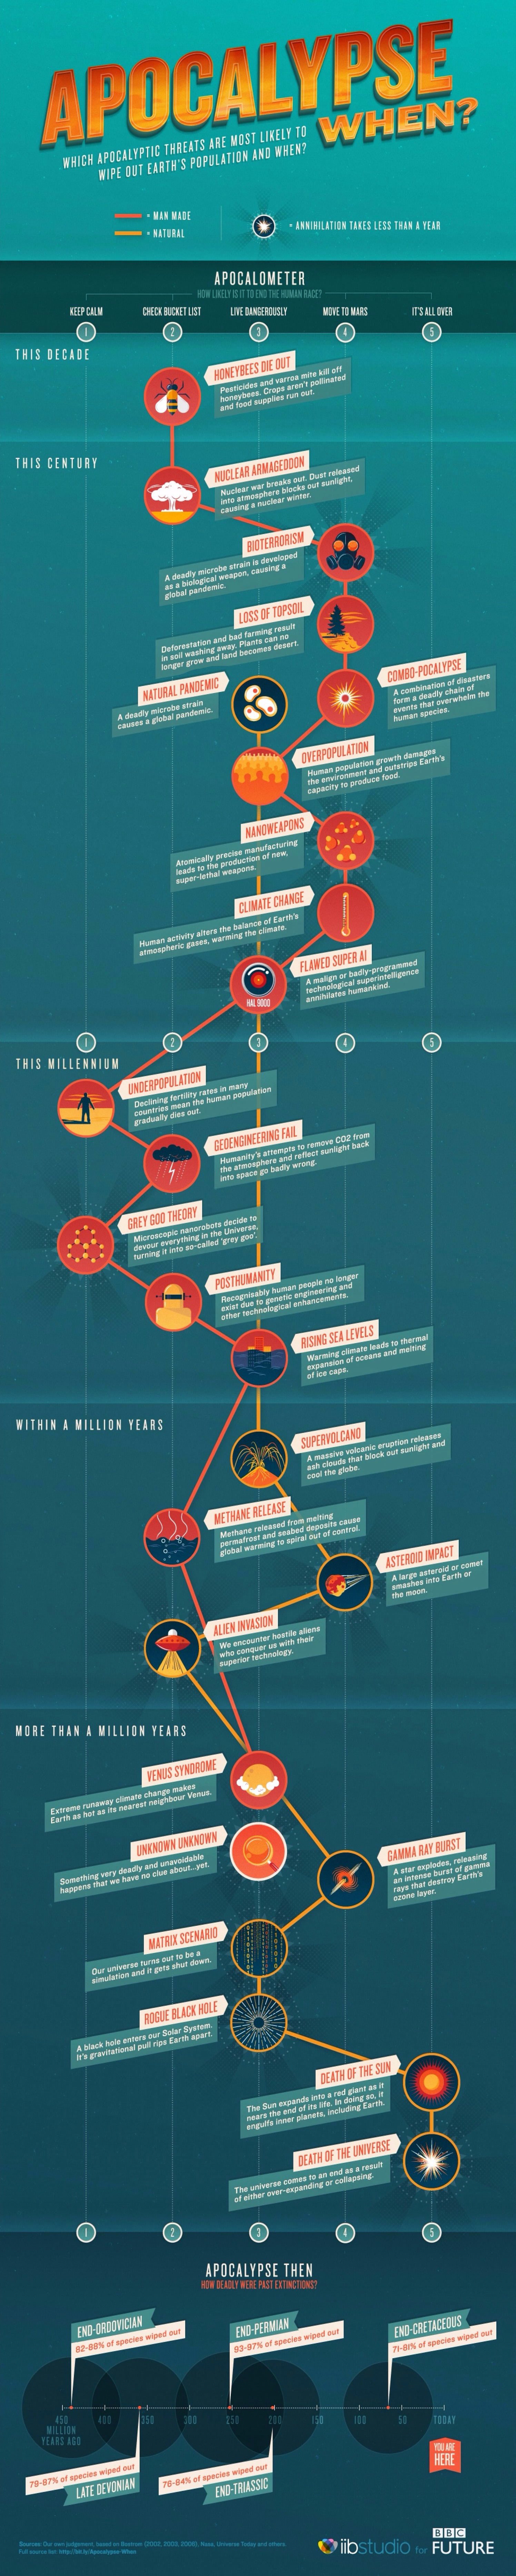 Apocalyptic Threats That Could Trigger Human Extinction Infographic